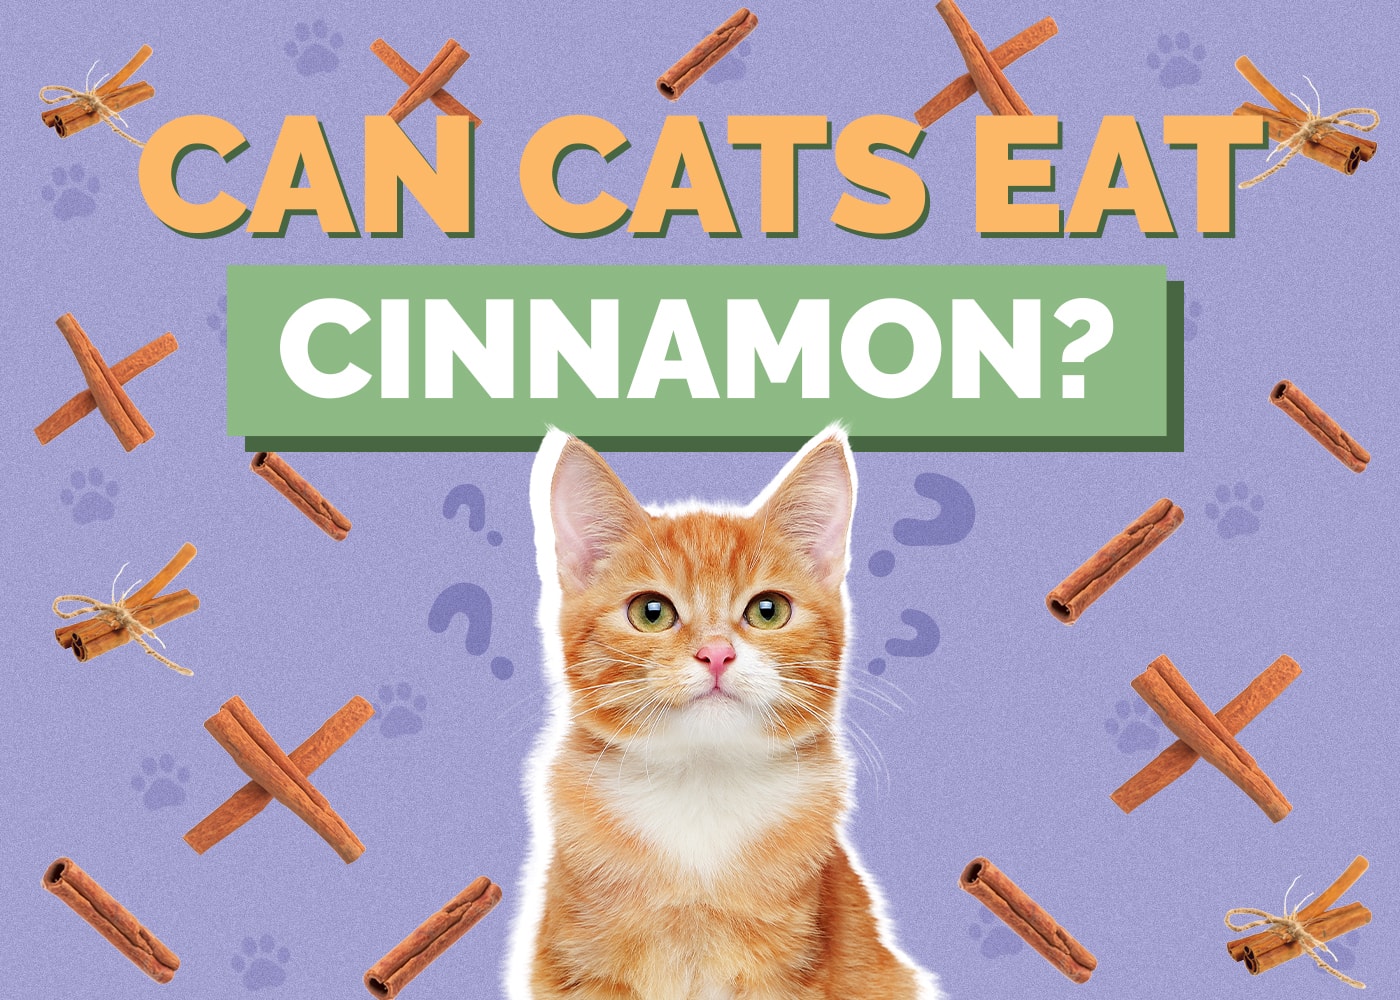 Can Cats Eat cinnamon